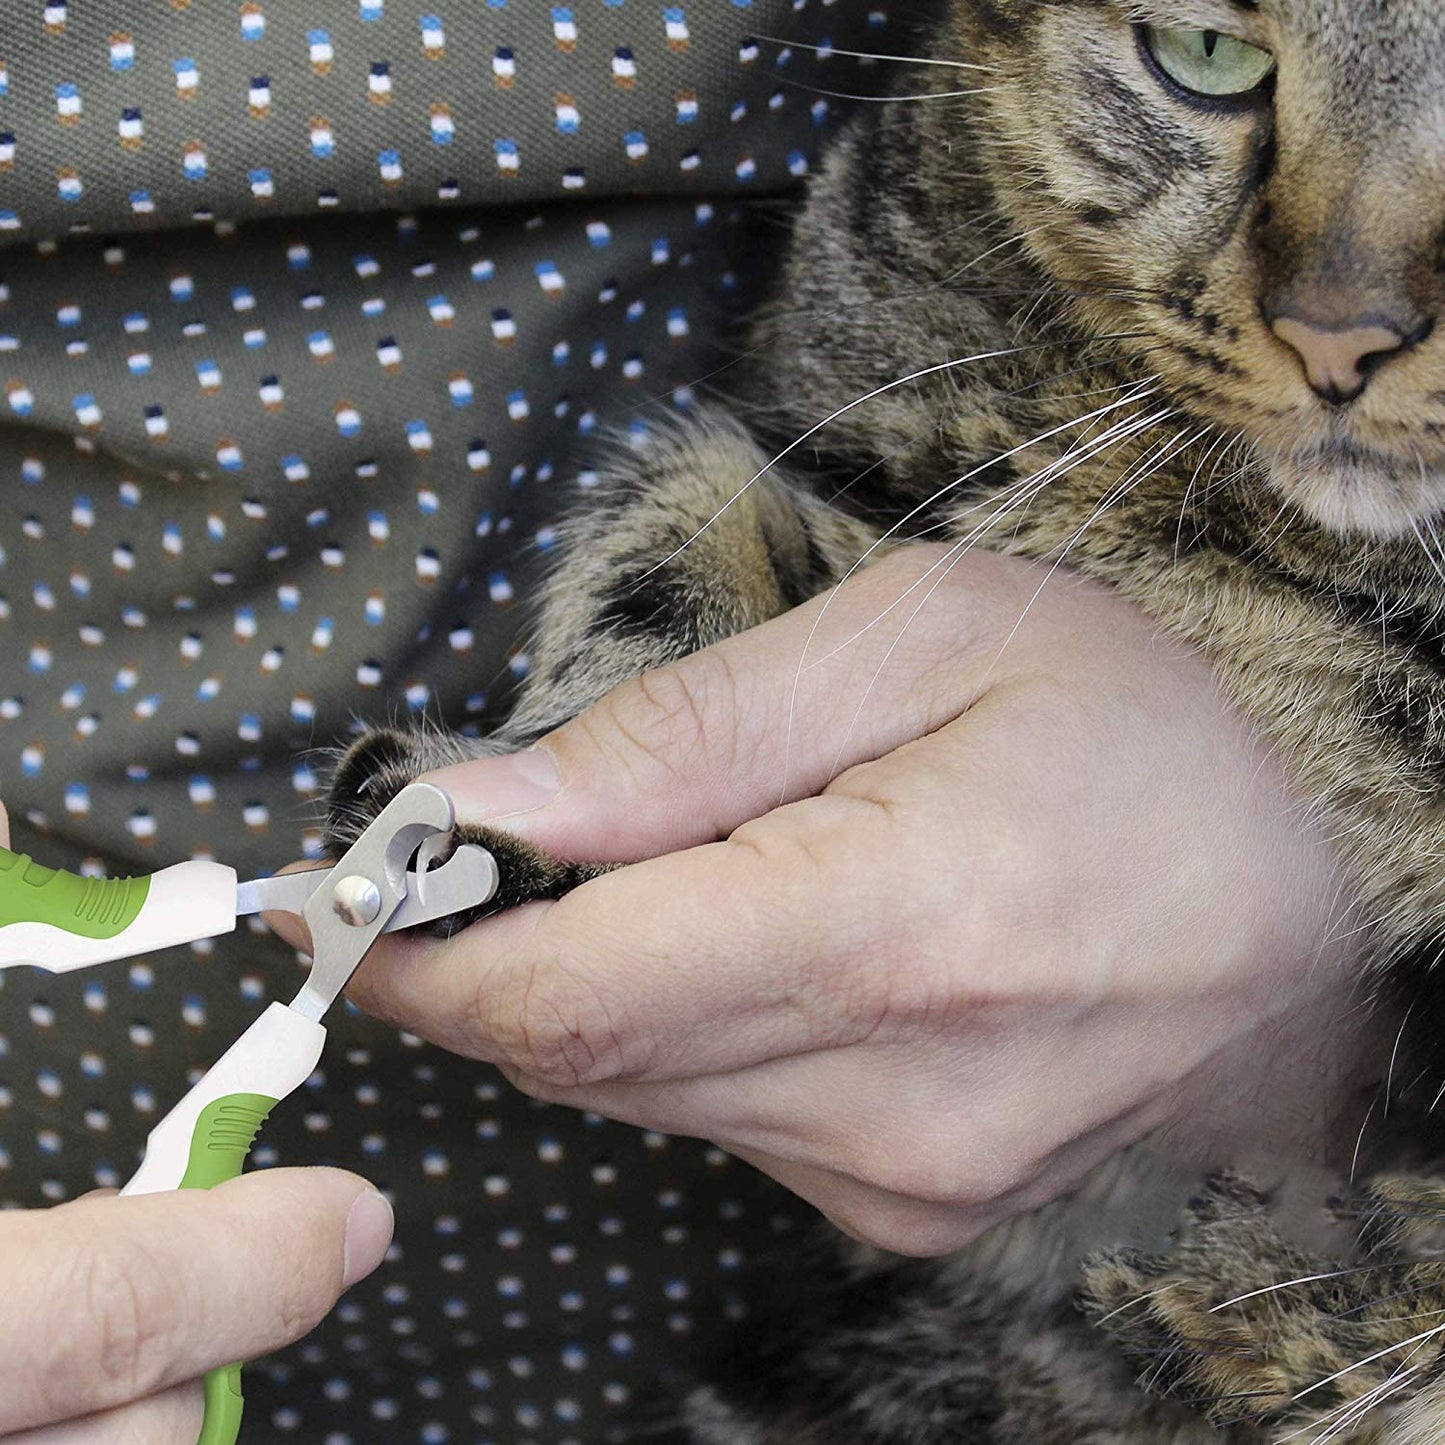 Pet Nail Clippers for Small Animals - Best Cat Nail Clippers & Claw Trimmer for Home Grooming Kit - Professional Grooming Tool for Tiny Dog Cat Bunny Rabbit Bird Puppy Kitten Ferret